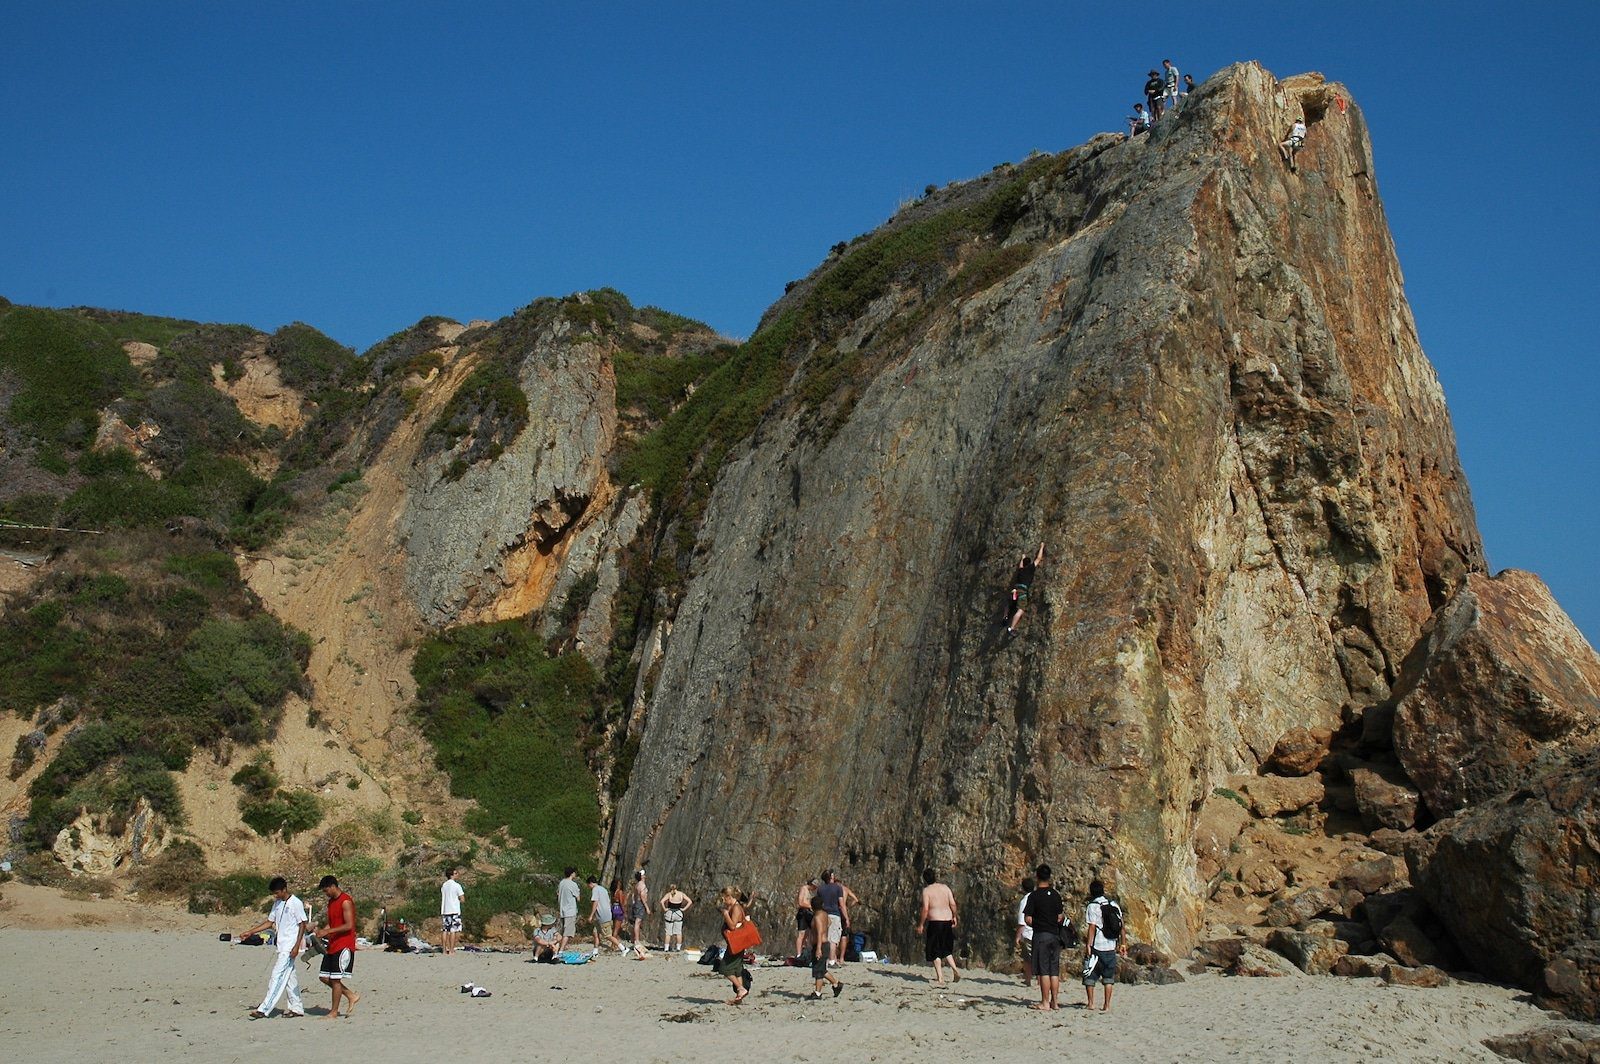 Rock climbers and observers at Point Dume, California